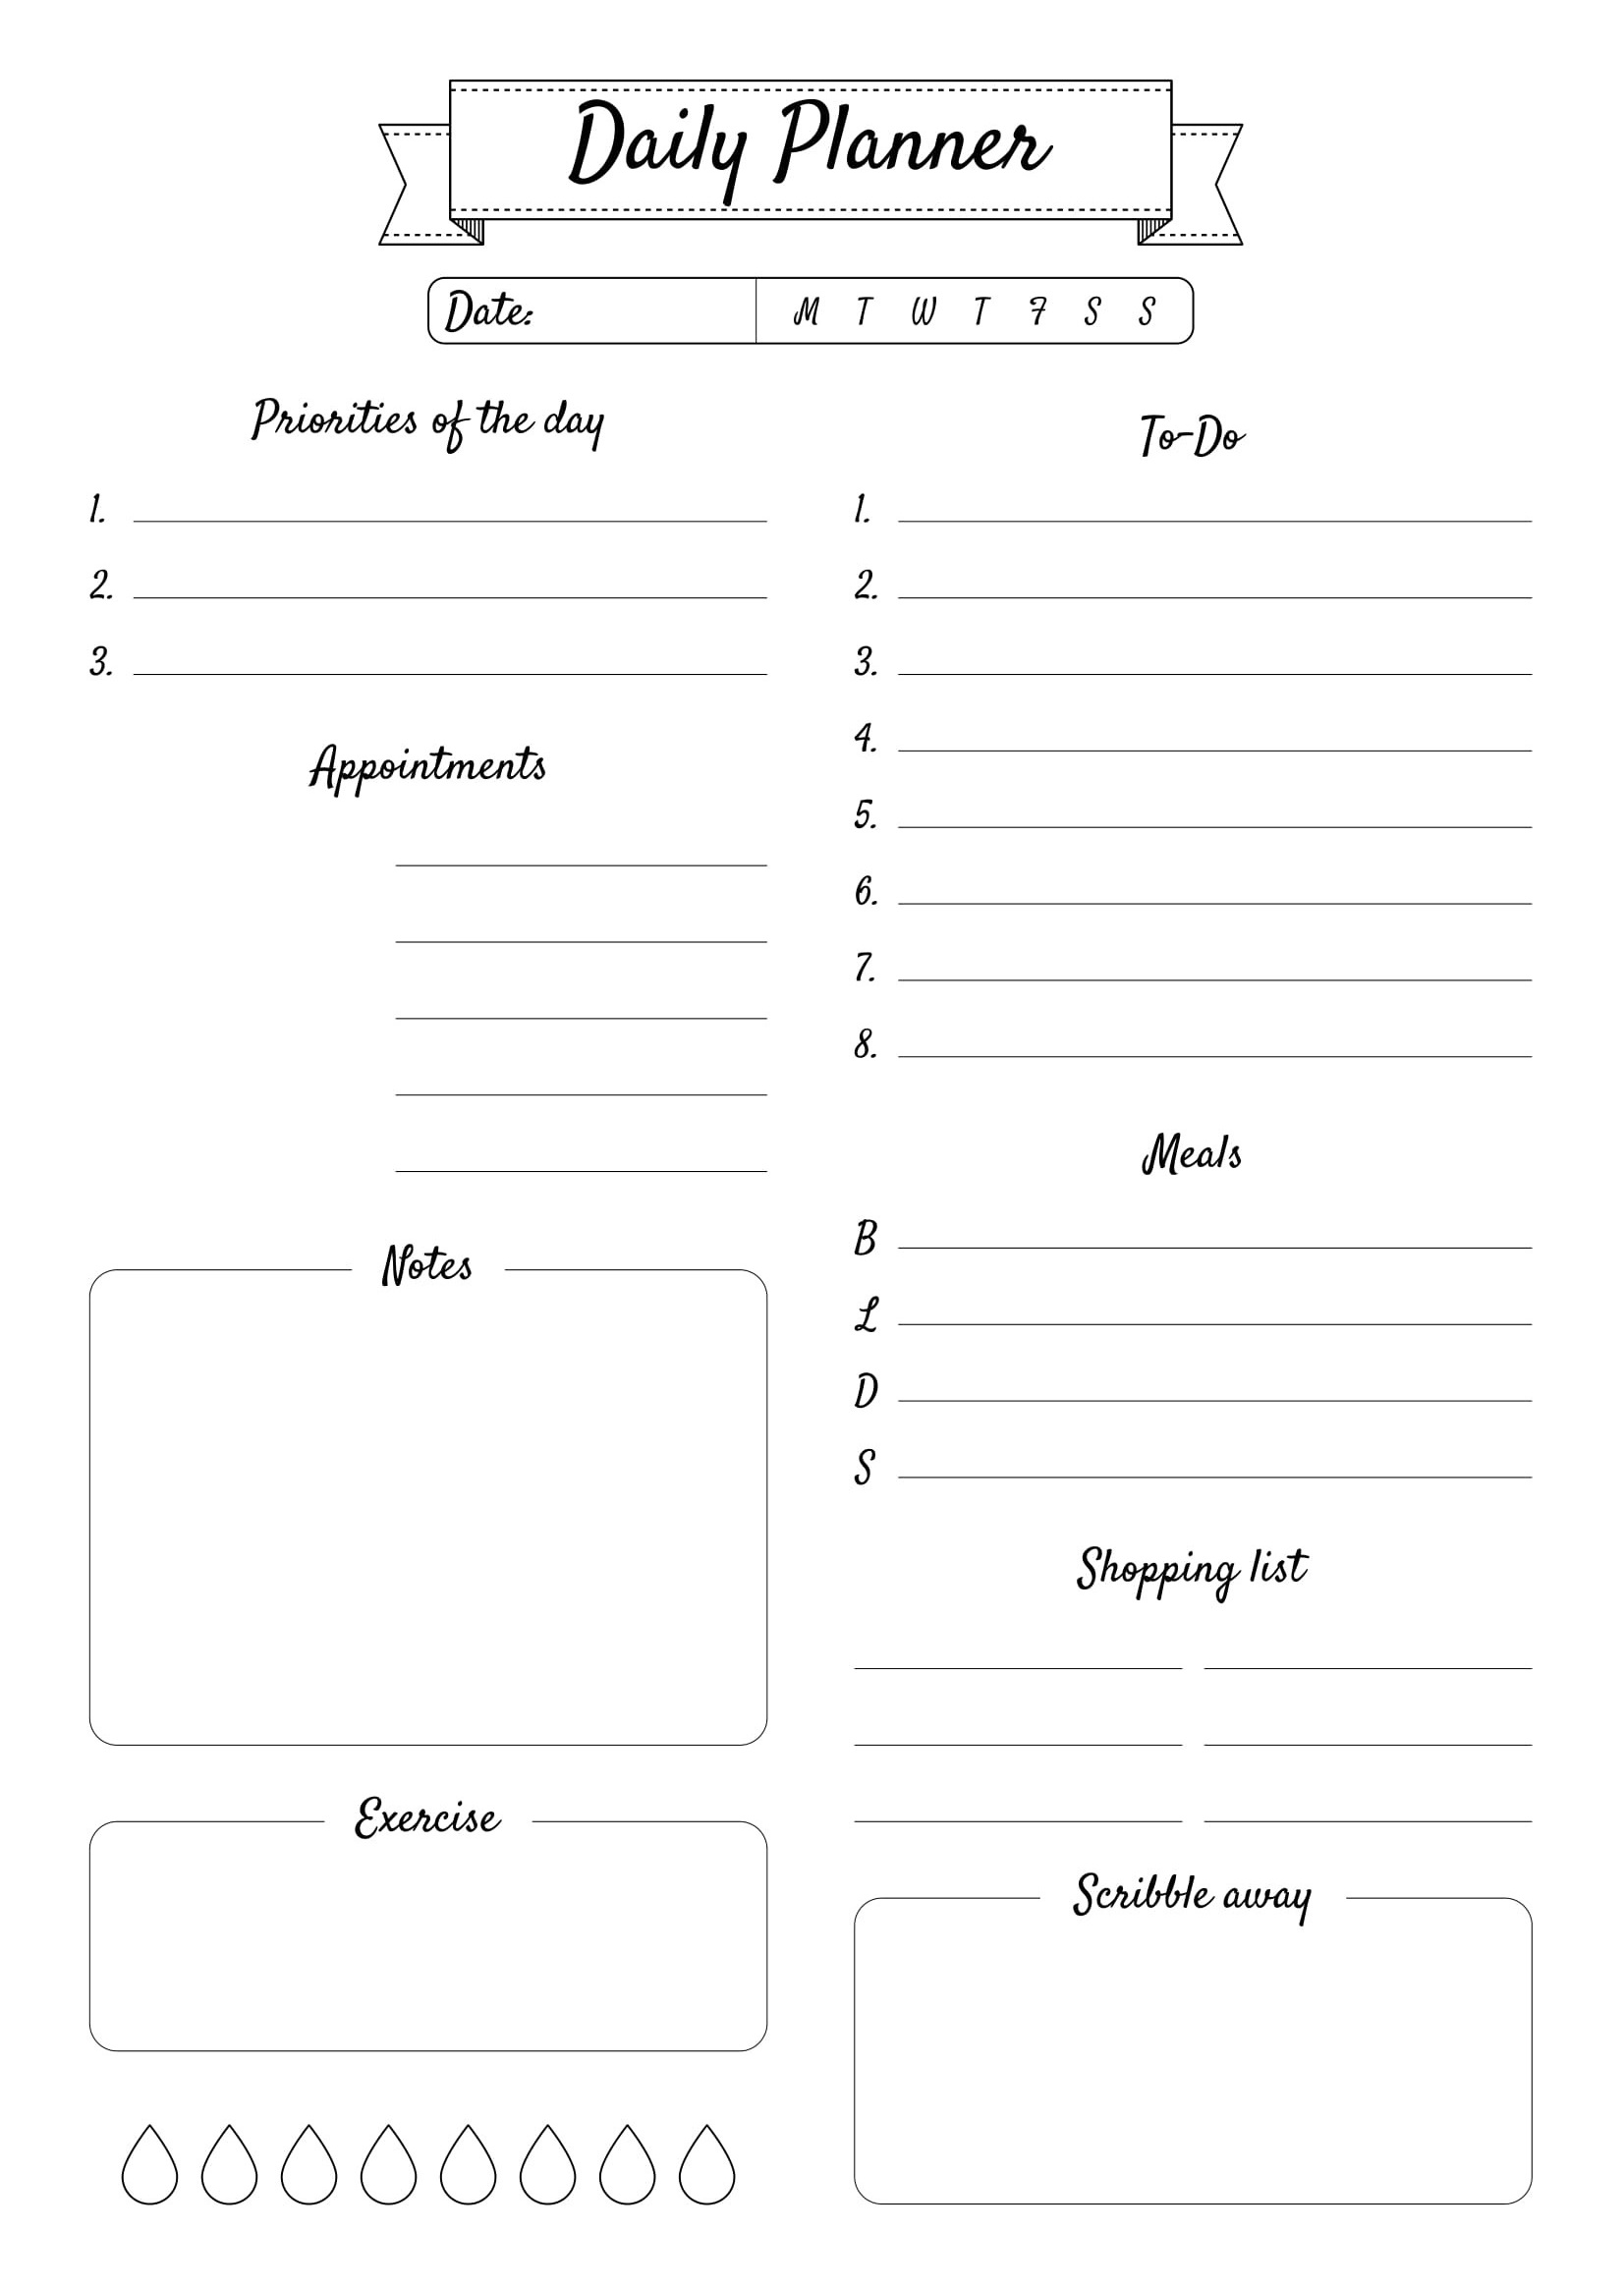 printable-daily-planner-and-calendar-2020-in-floral-design-free